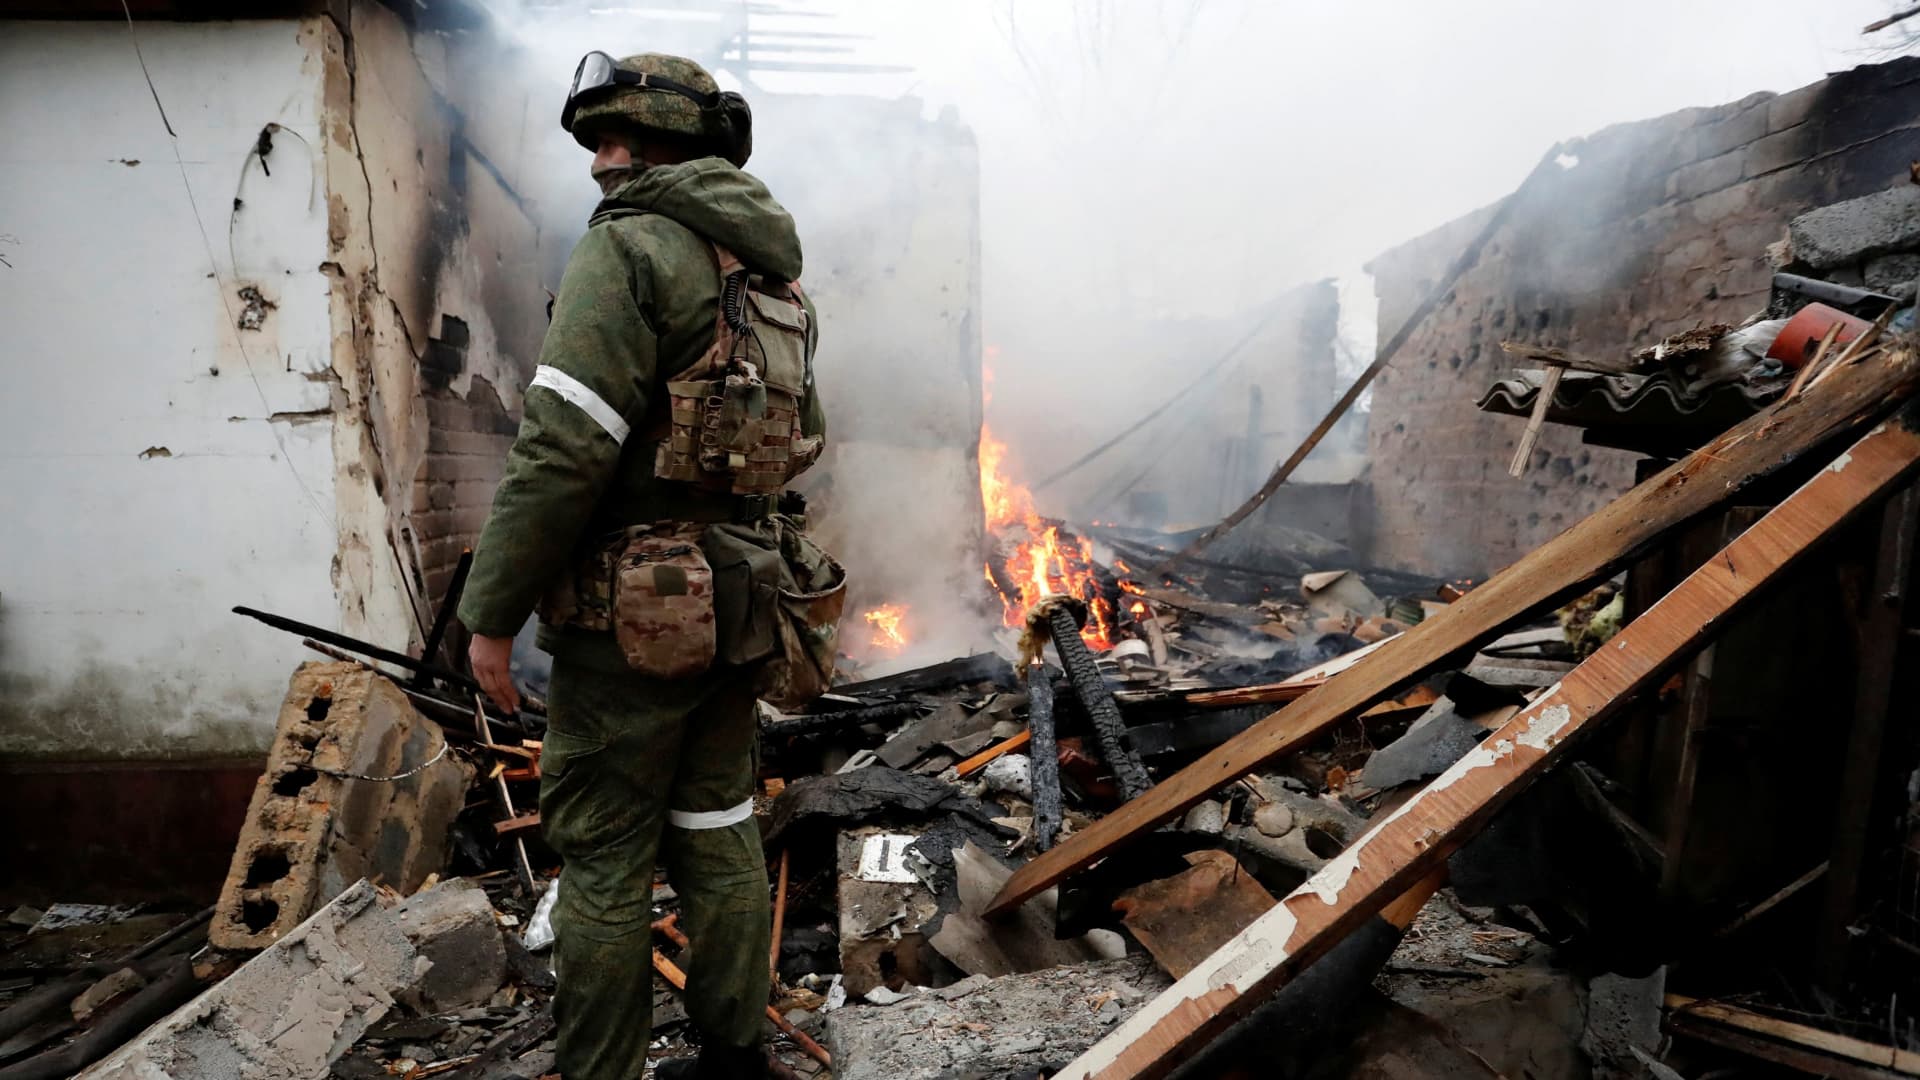 A serviceman of pro-Russian militia stands next to a house that caught fire after recent shelling, in the separatist-controlled city of Donetsk, Ukraine February 28, 2022.